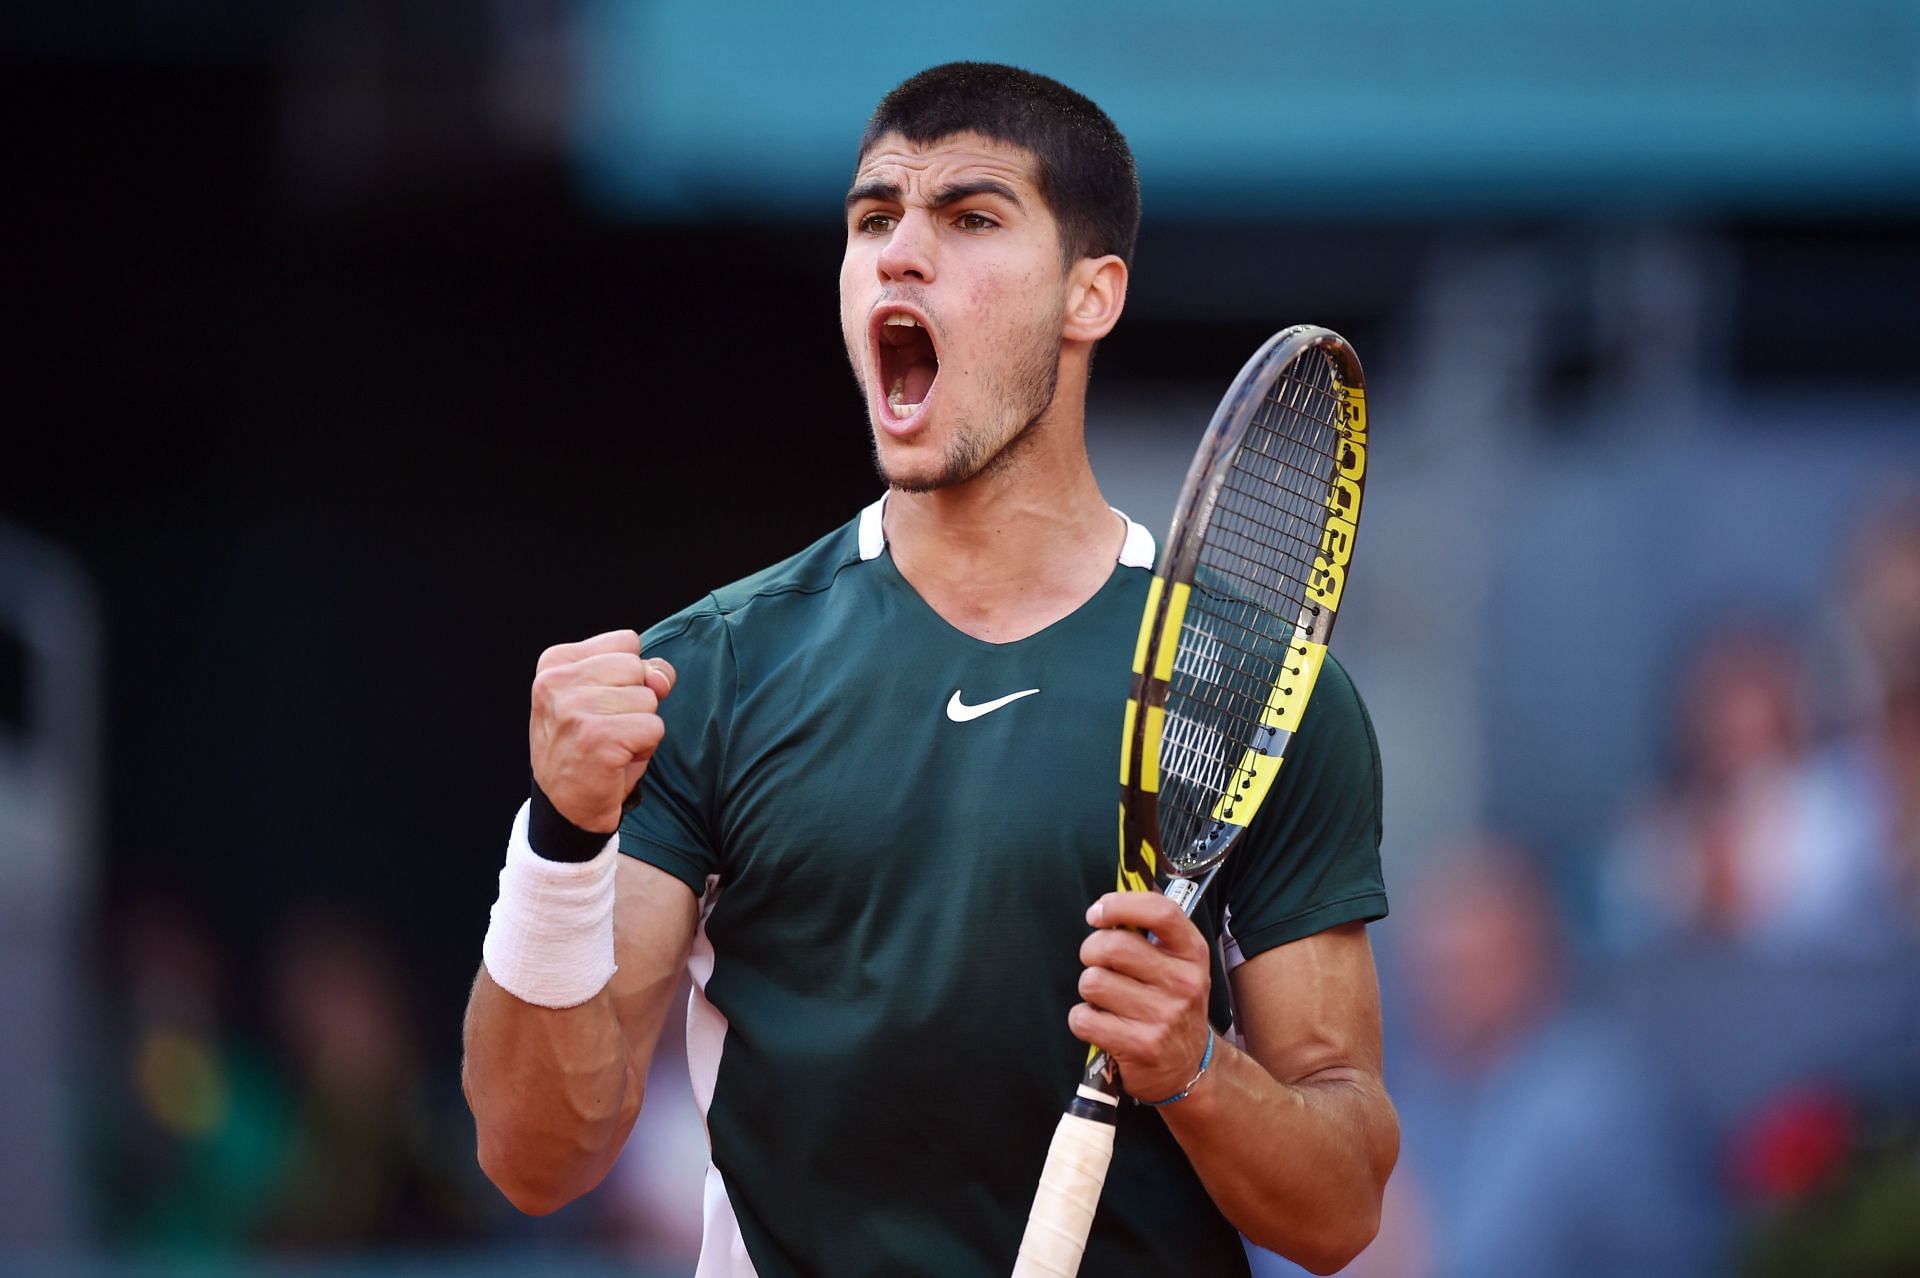 At 19 years and three days, Alcaraz is the youngest player to beat a World No. 1 in 17 years